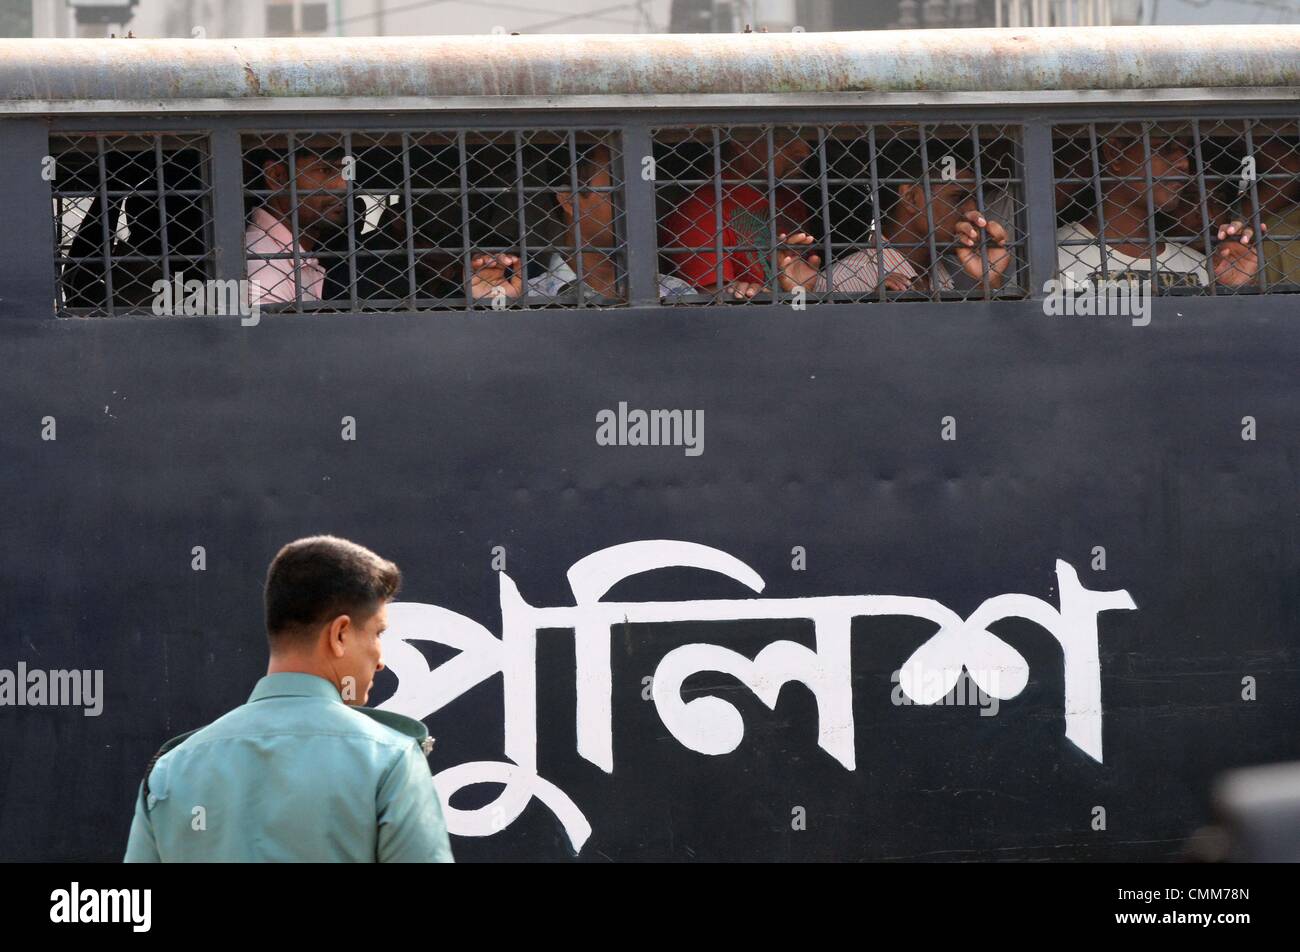 Dhaka, Bangladesh. 5th November 2013. Handcuffed Bangladesh Rifles (BDR) soldiers look through a prison van as they arrive at the special court in Dhaka on November 5, 2013. Some 800 Bangladeshi soldiers appeared in a huge specially-built court accused of murder and other serious offences during a bloody mutiny in 2009. During the uprising, which lasted about 30 hours, 74 people -including 57 senior army officers- were killed at a military base in the capital Dhaka.. Stock Photo